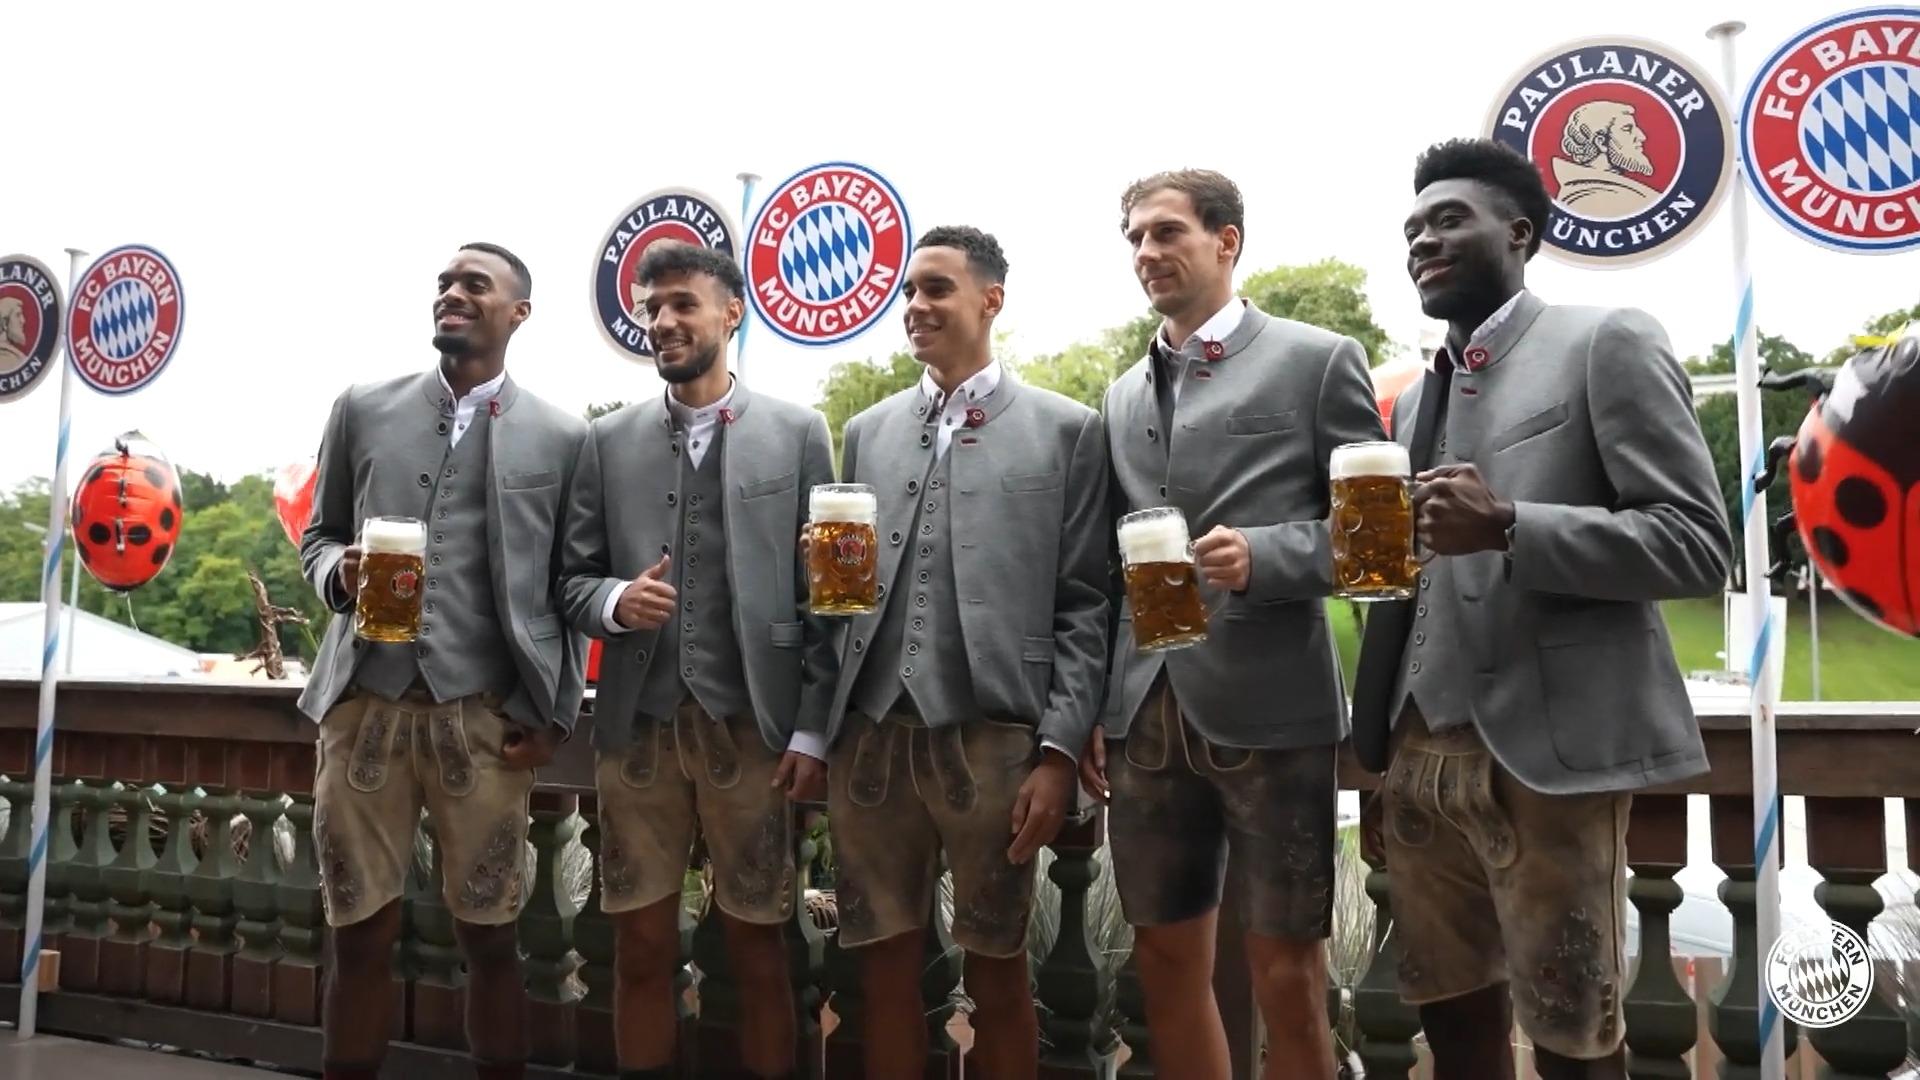 Fc Bayern With A Tortured Smile At The Wiesn Good Face To The Bad Game